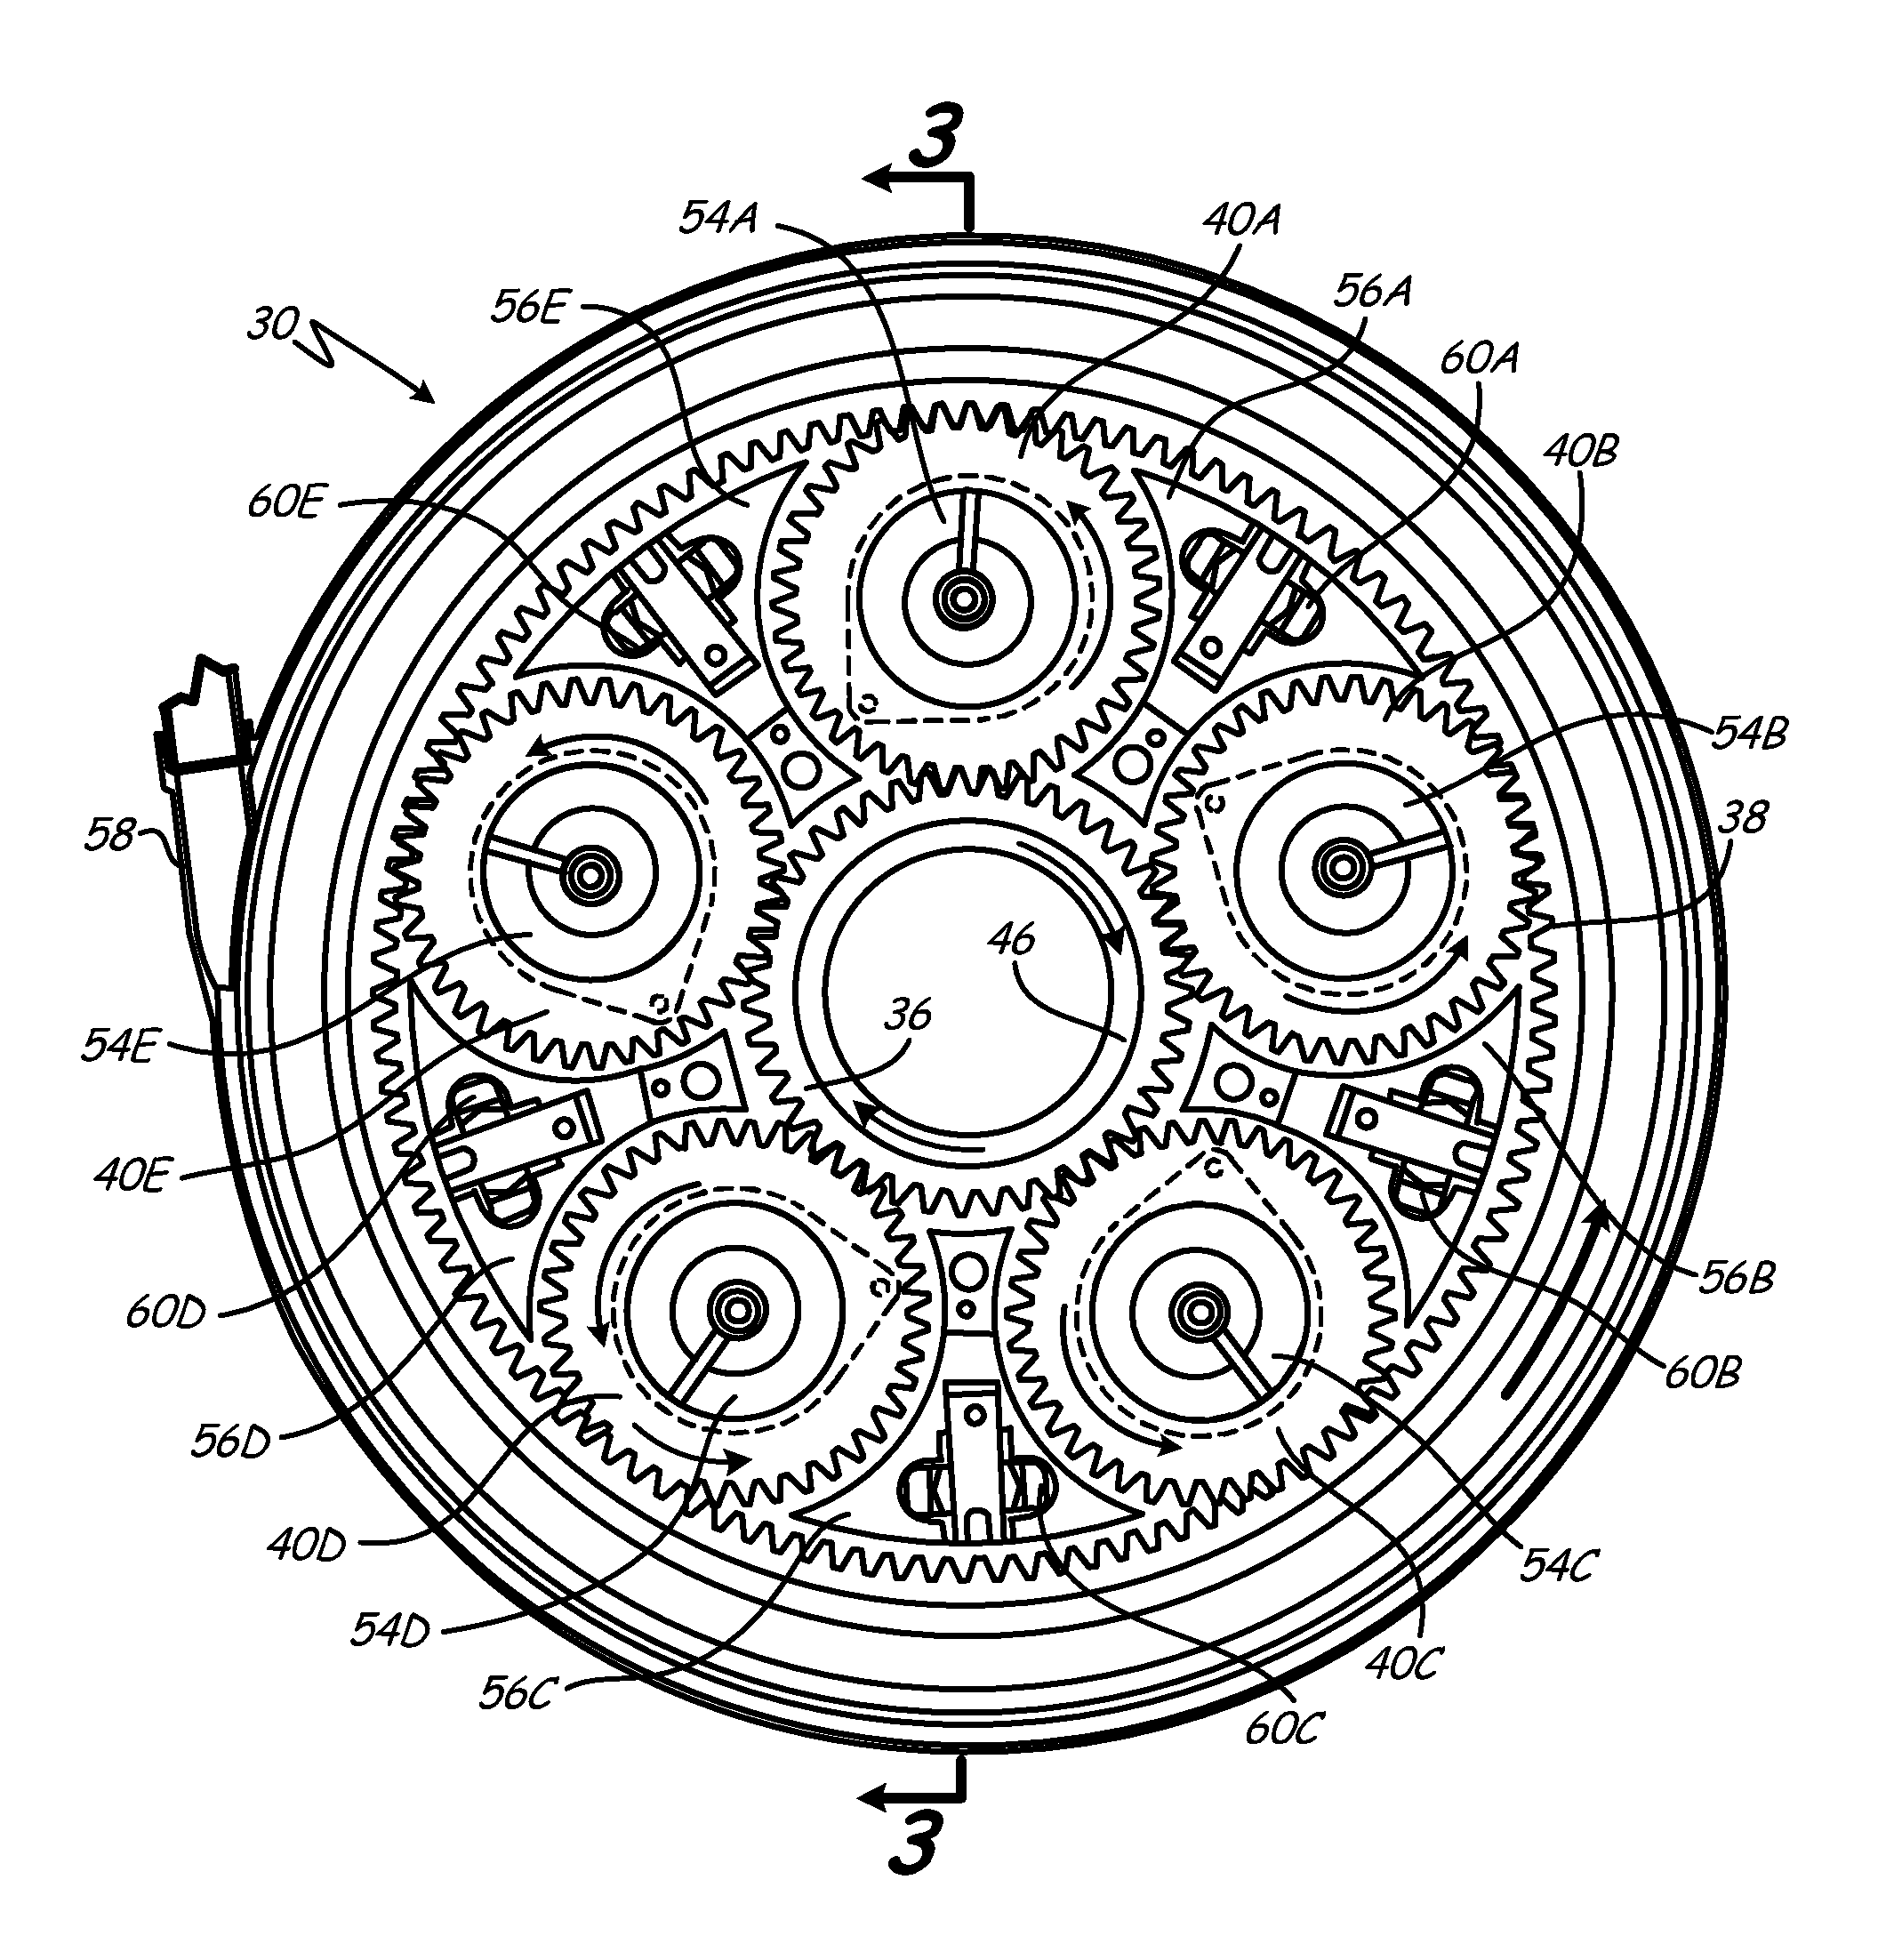 Coupling system for a star gear train in a gas turbine engine